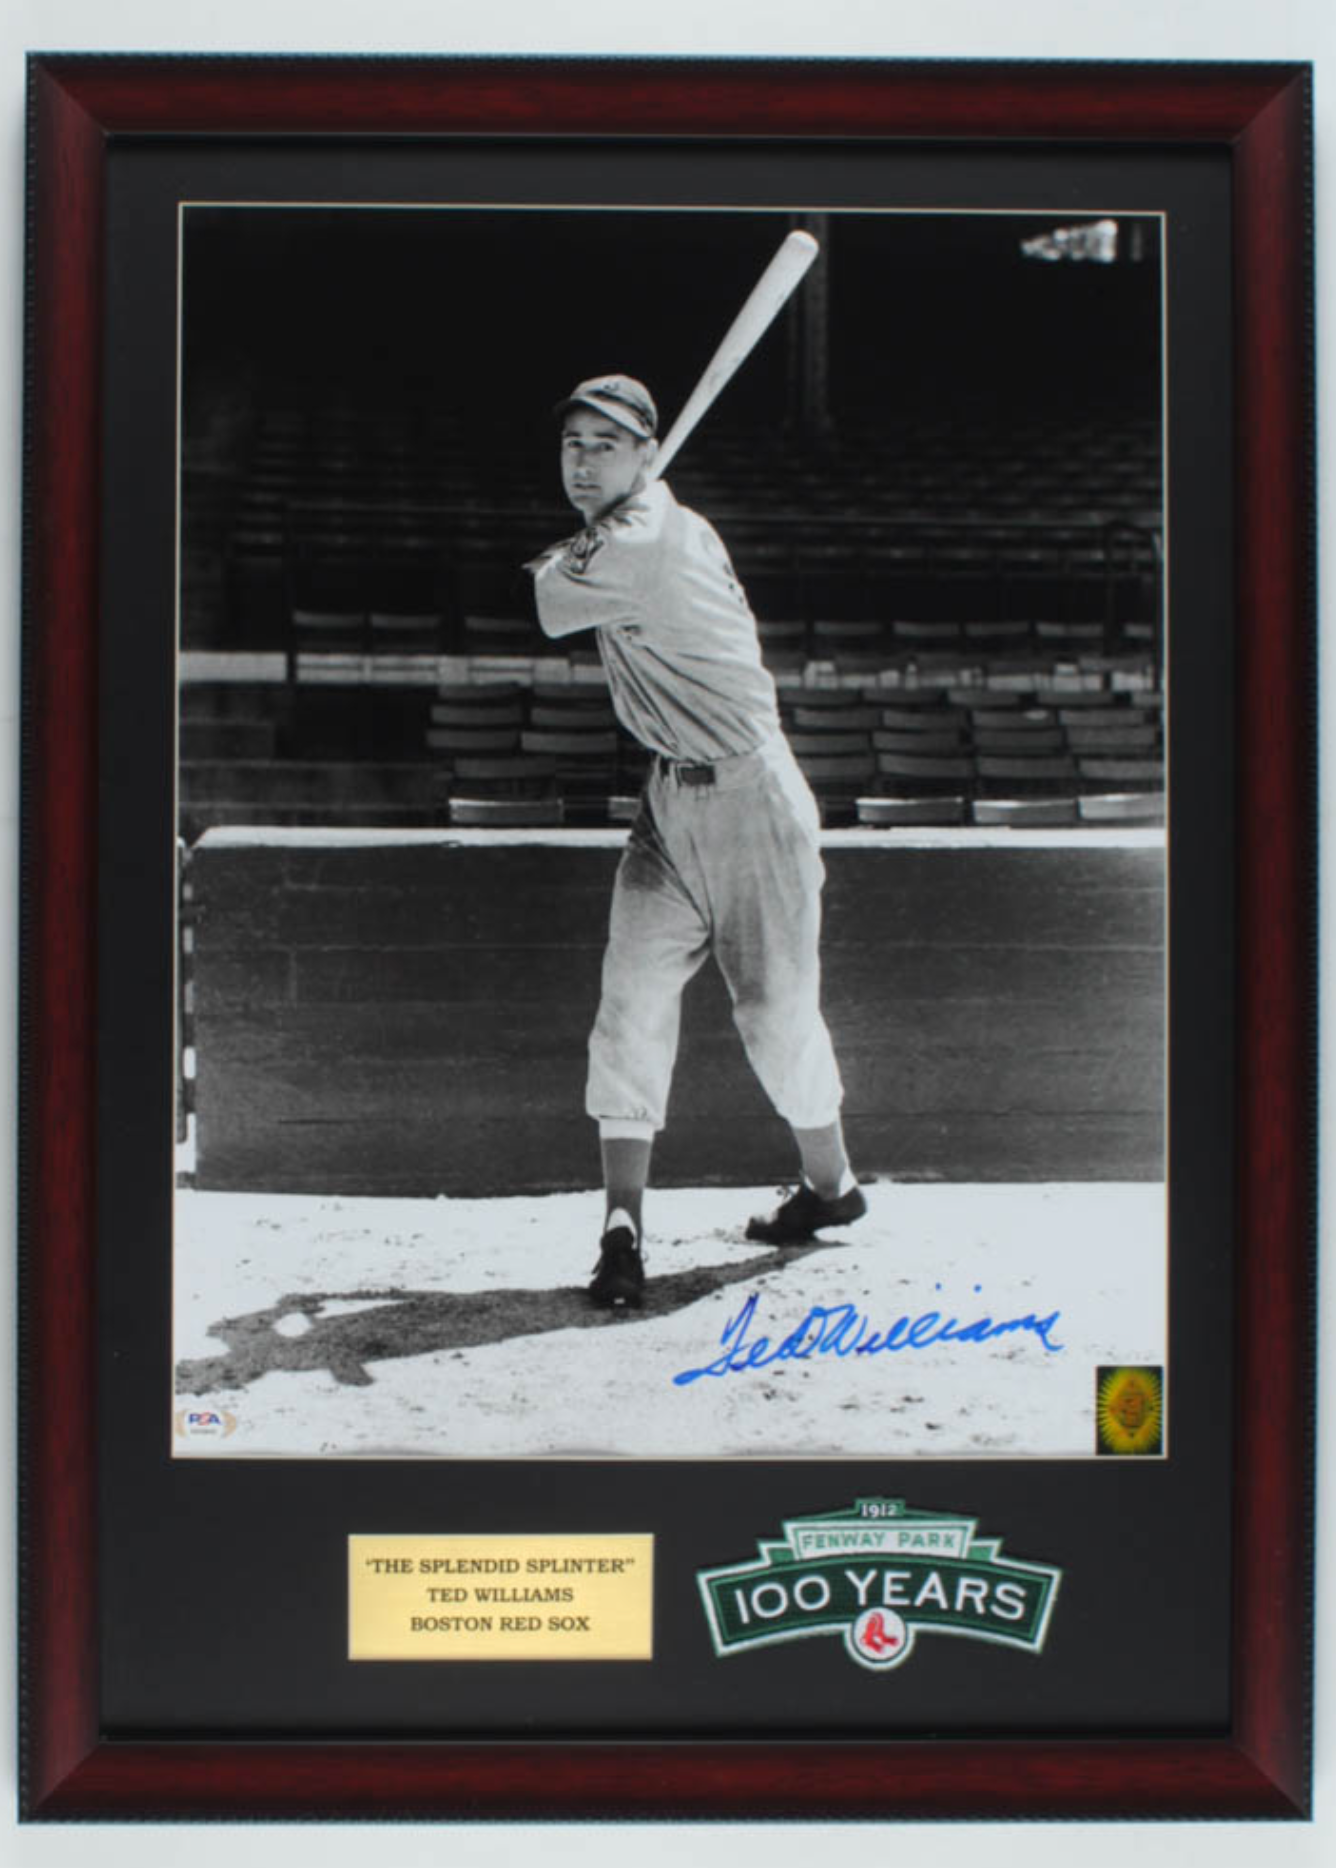 Ted Williams Signed Red Sox 19x26 Custom Framed Photo Display with Fenway Park Patch (PSA LOA & Ted Williams COA) - BMC Collectibles